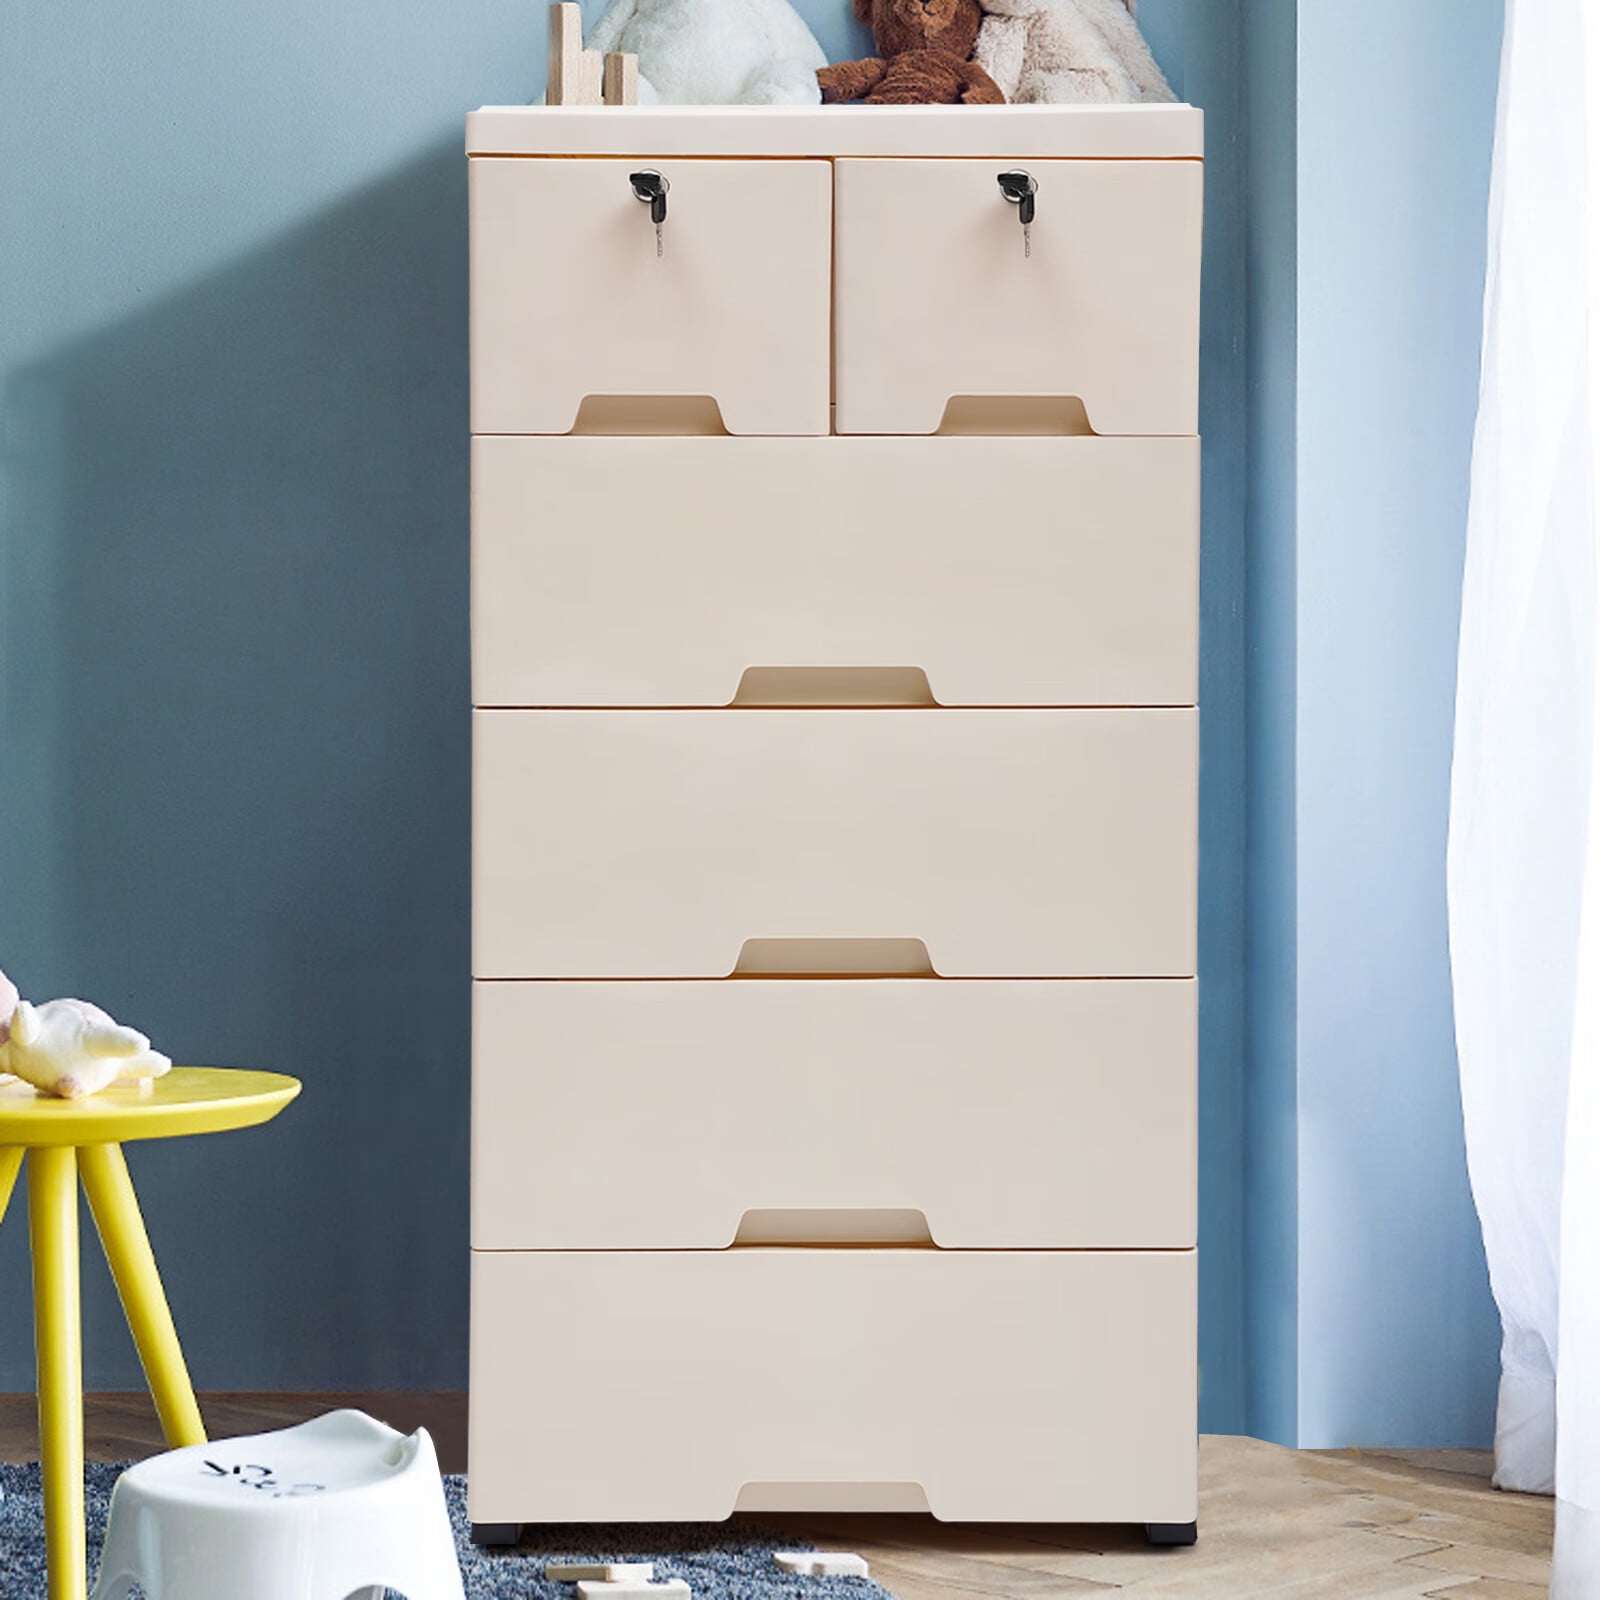 Storage Cabinet with 6 Drawers Tall Dresser Movable Plastic Organizer ...